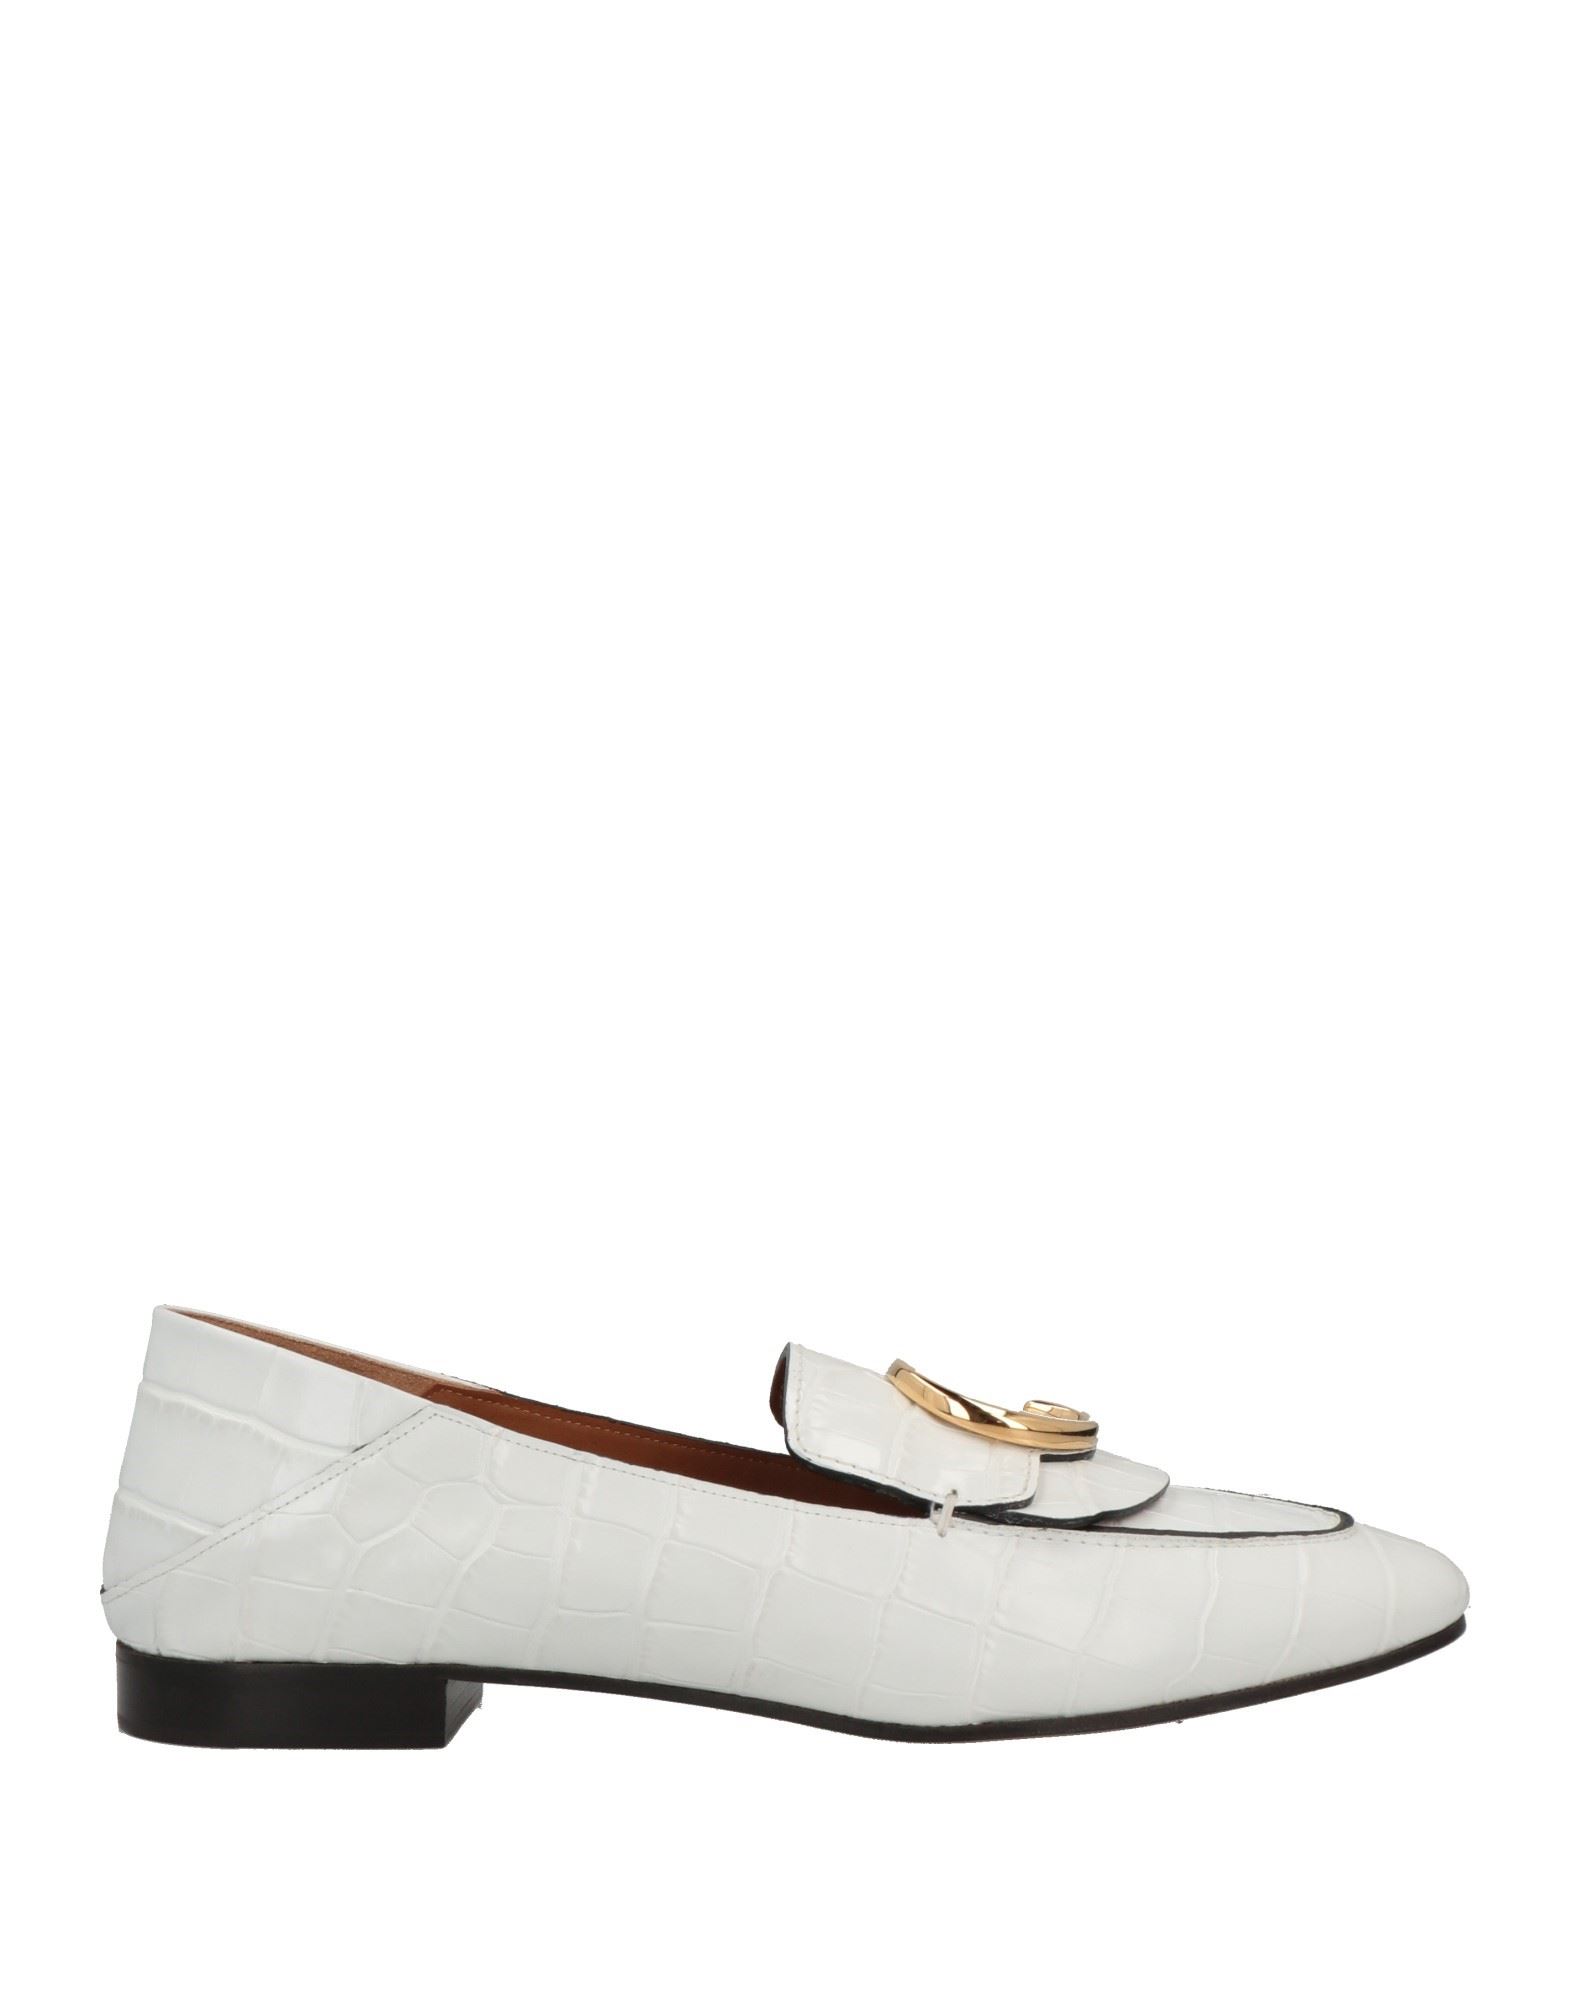 Chloé Loafers In White